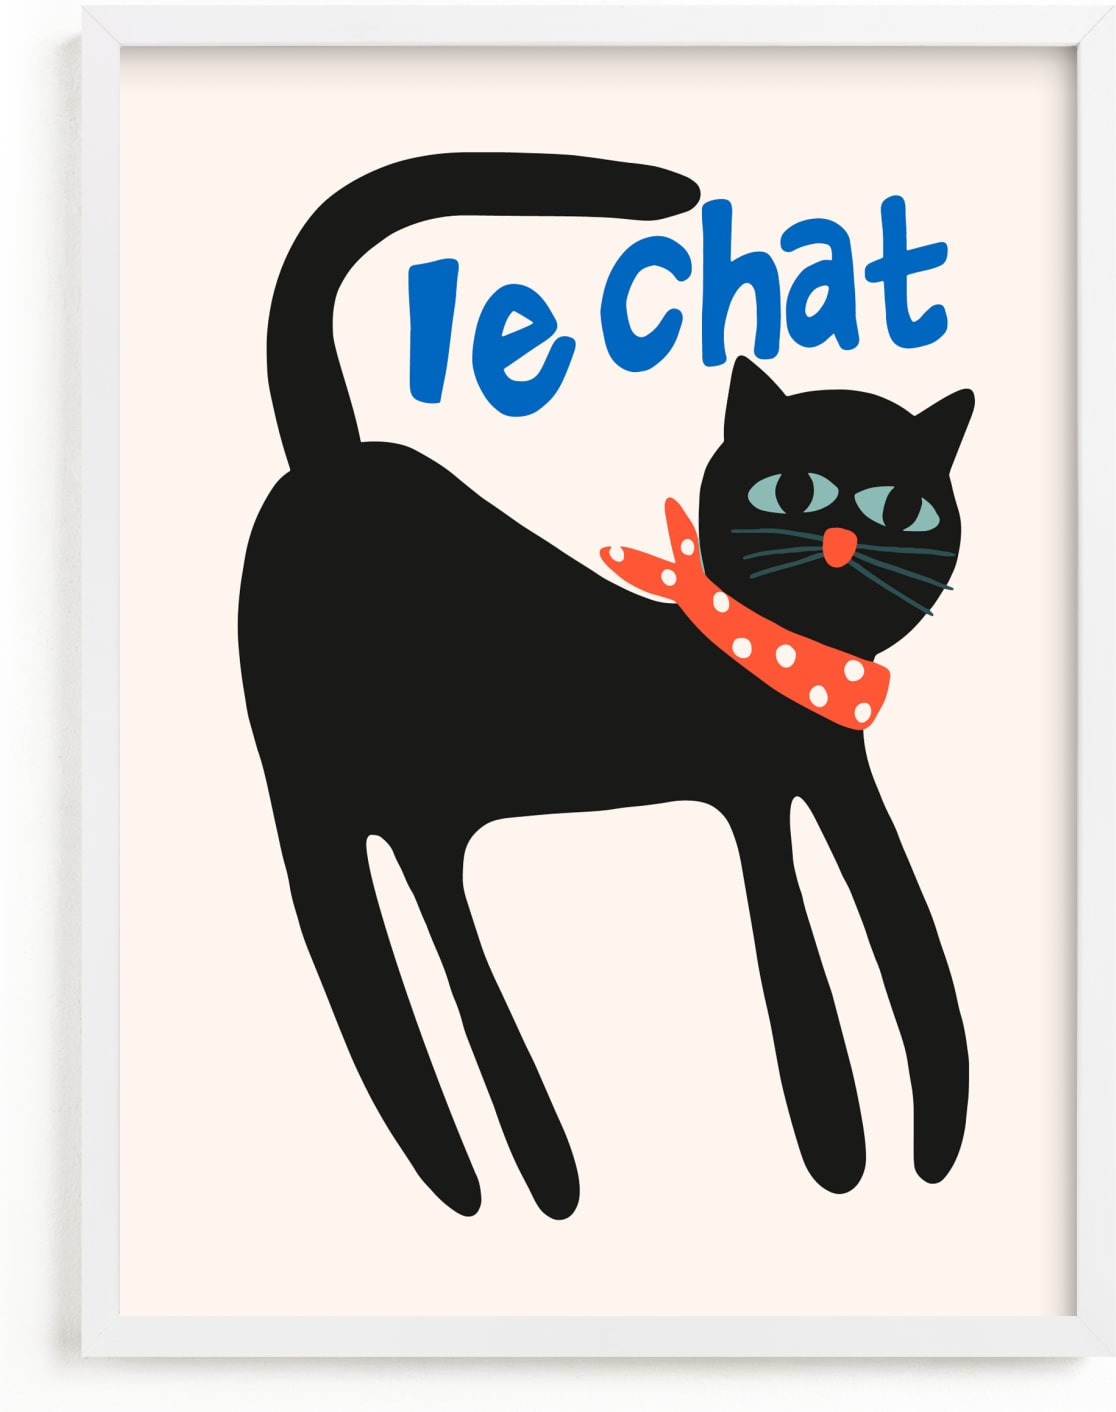 This is a blue kids wall art by Morgan Kendall called French Cat.